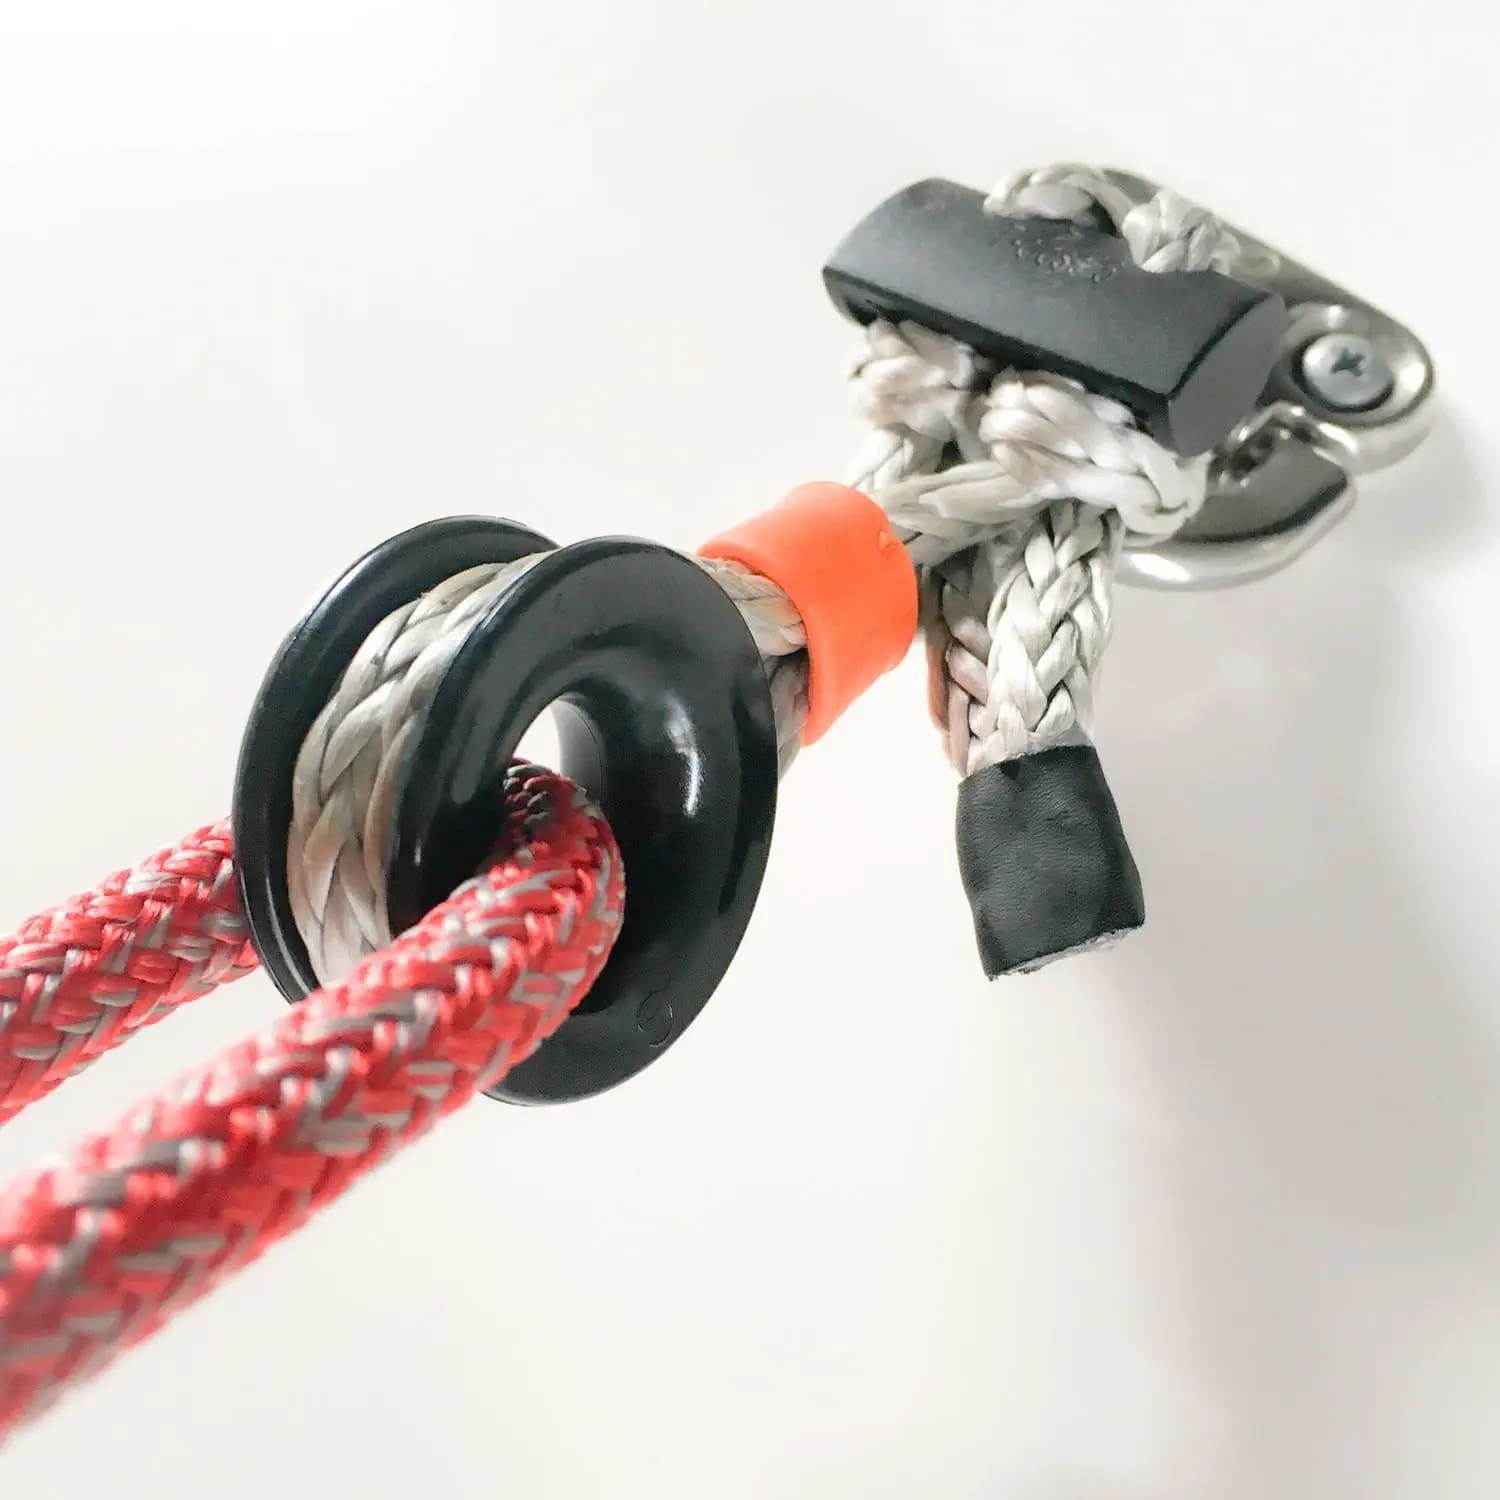 Recovery Pulley Ring 30000 KG for Soft Shackle and Winch Rope 4WD Recovery Gear 4x4 Offroad